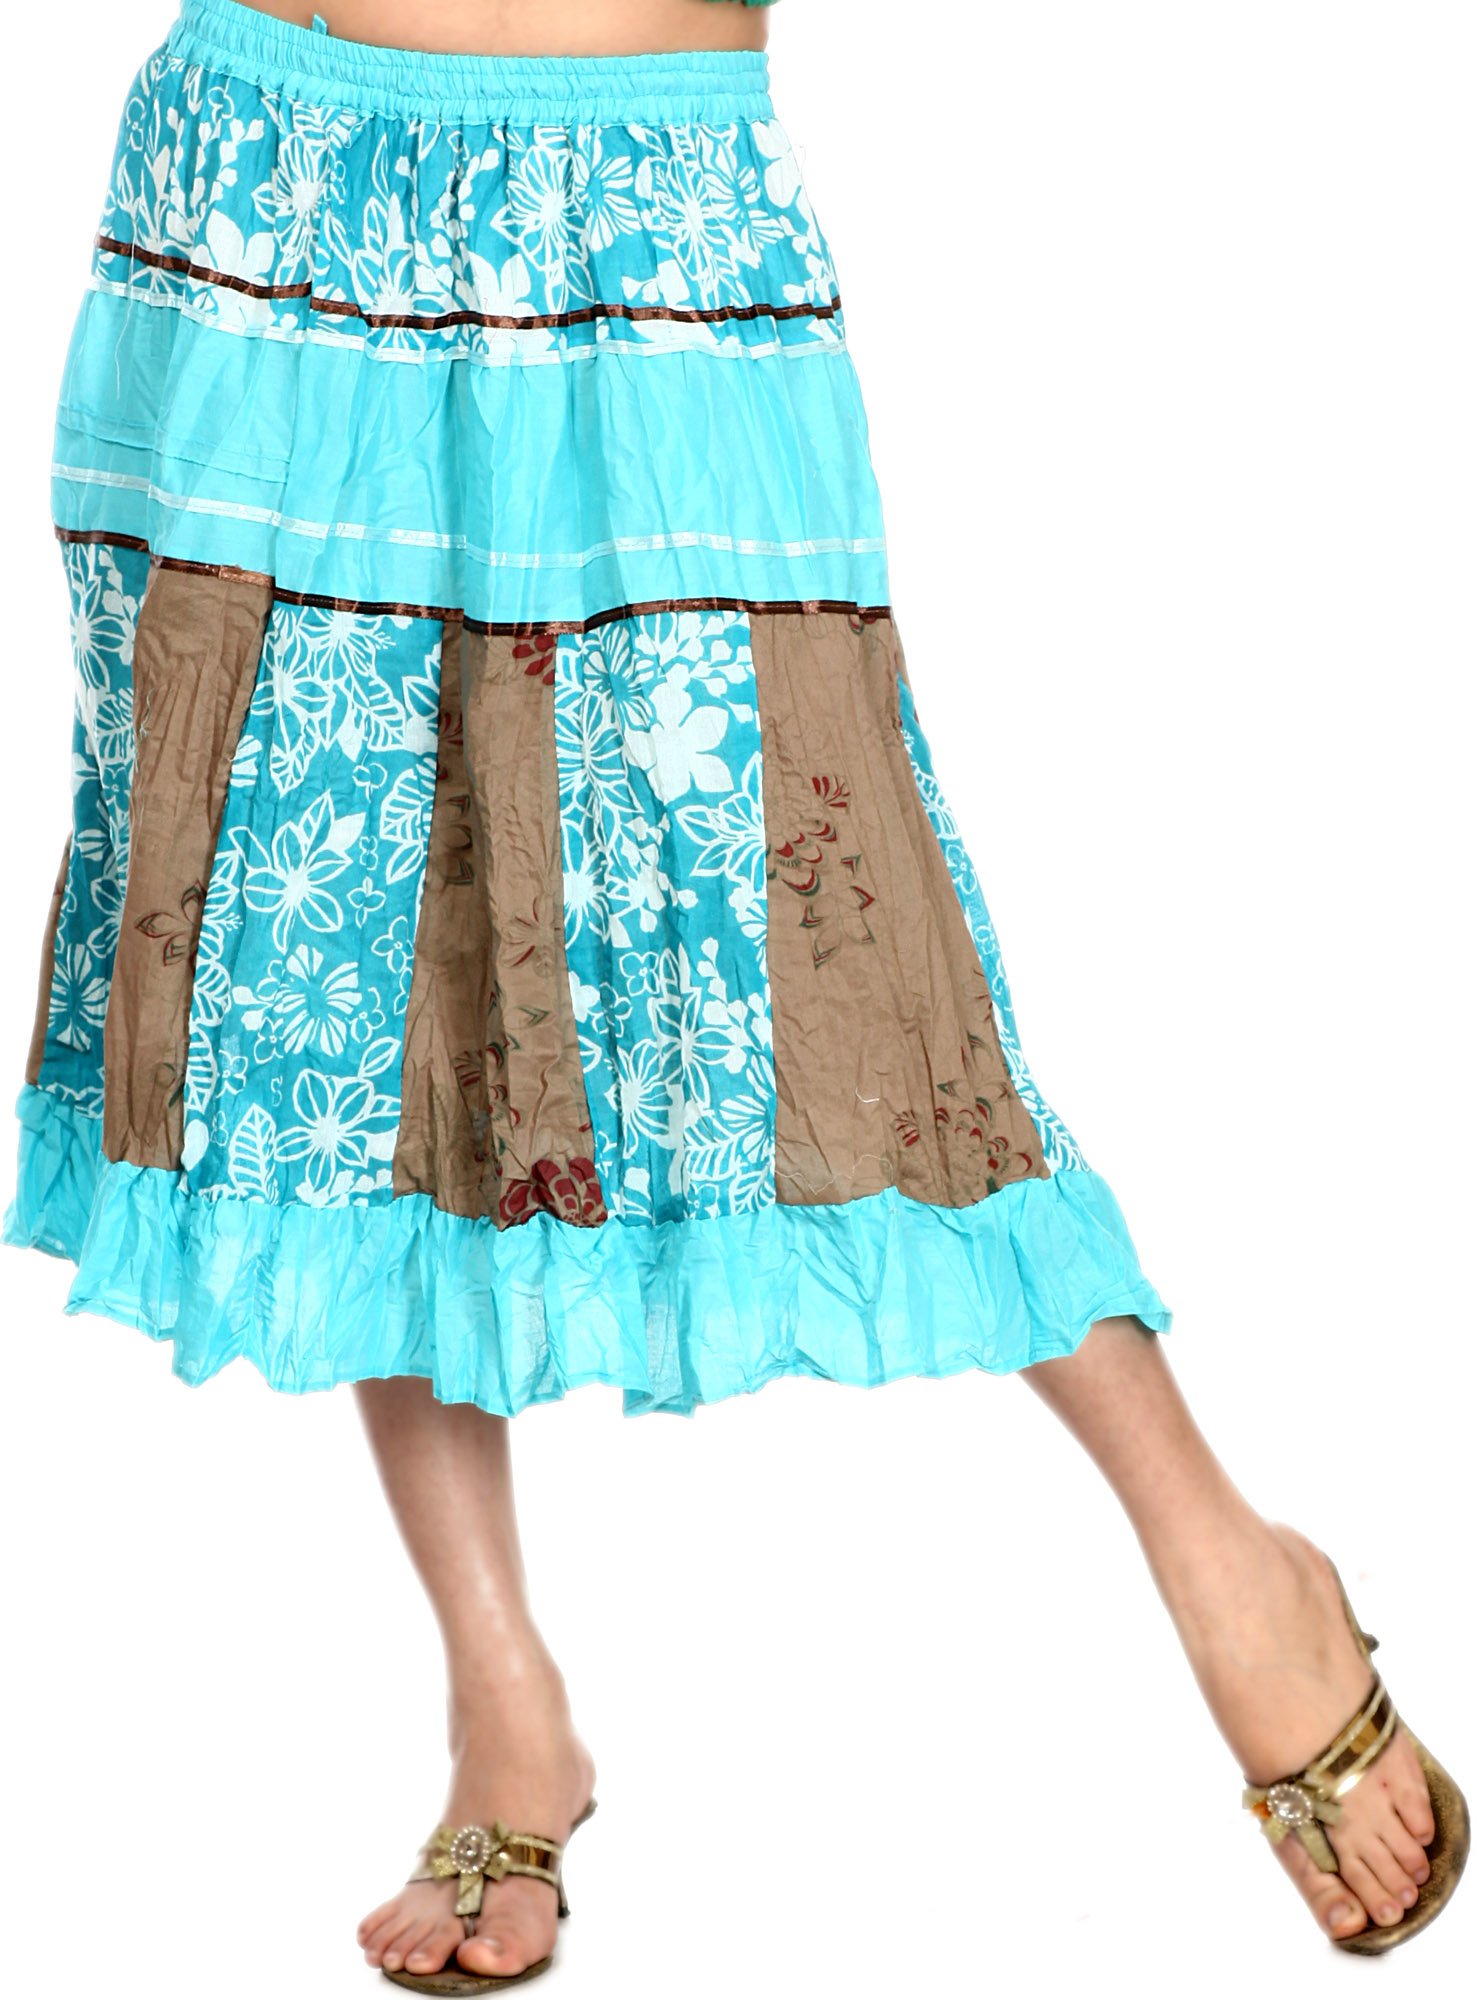 Capri-Blue Midi-Skirt with Printed Flowers and Patchwork